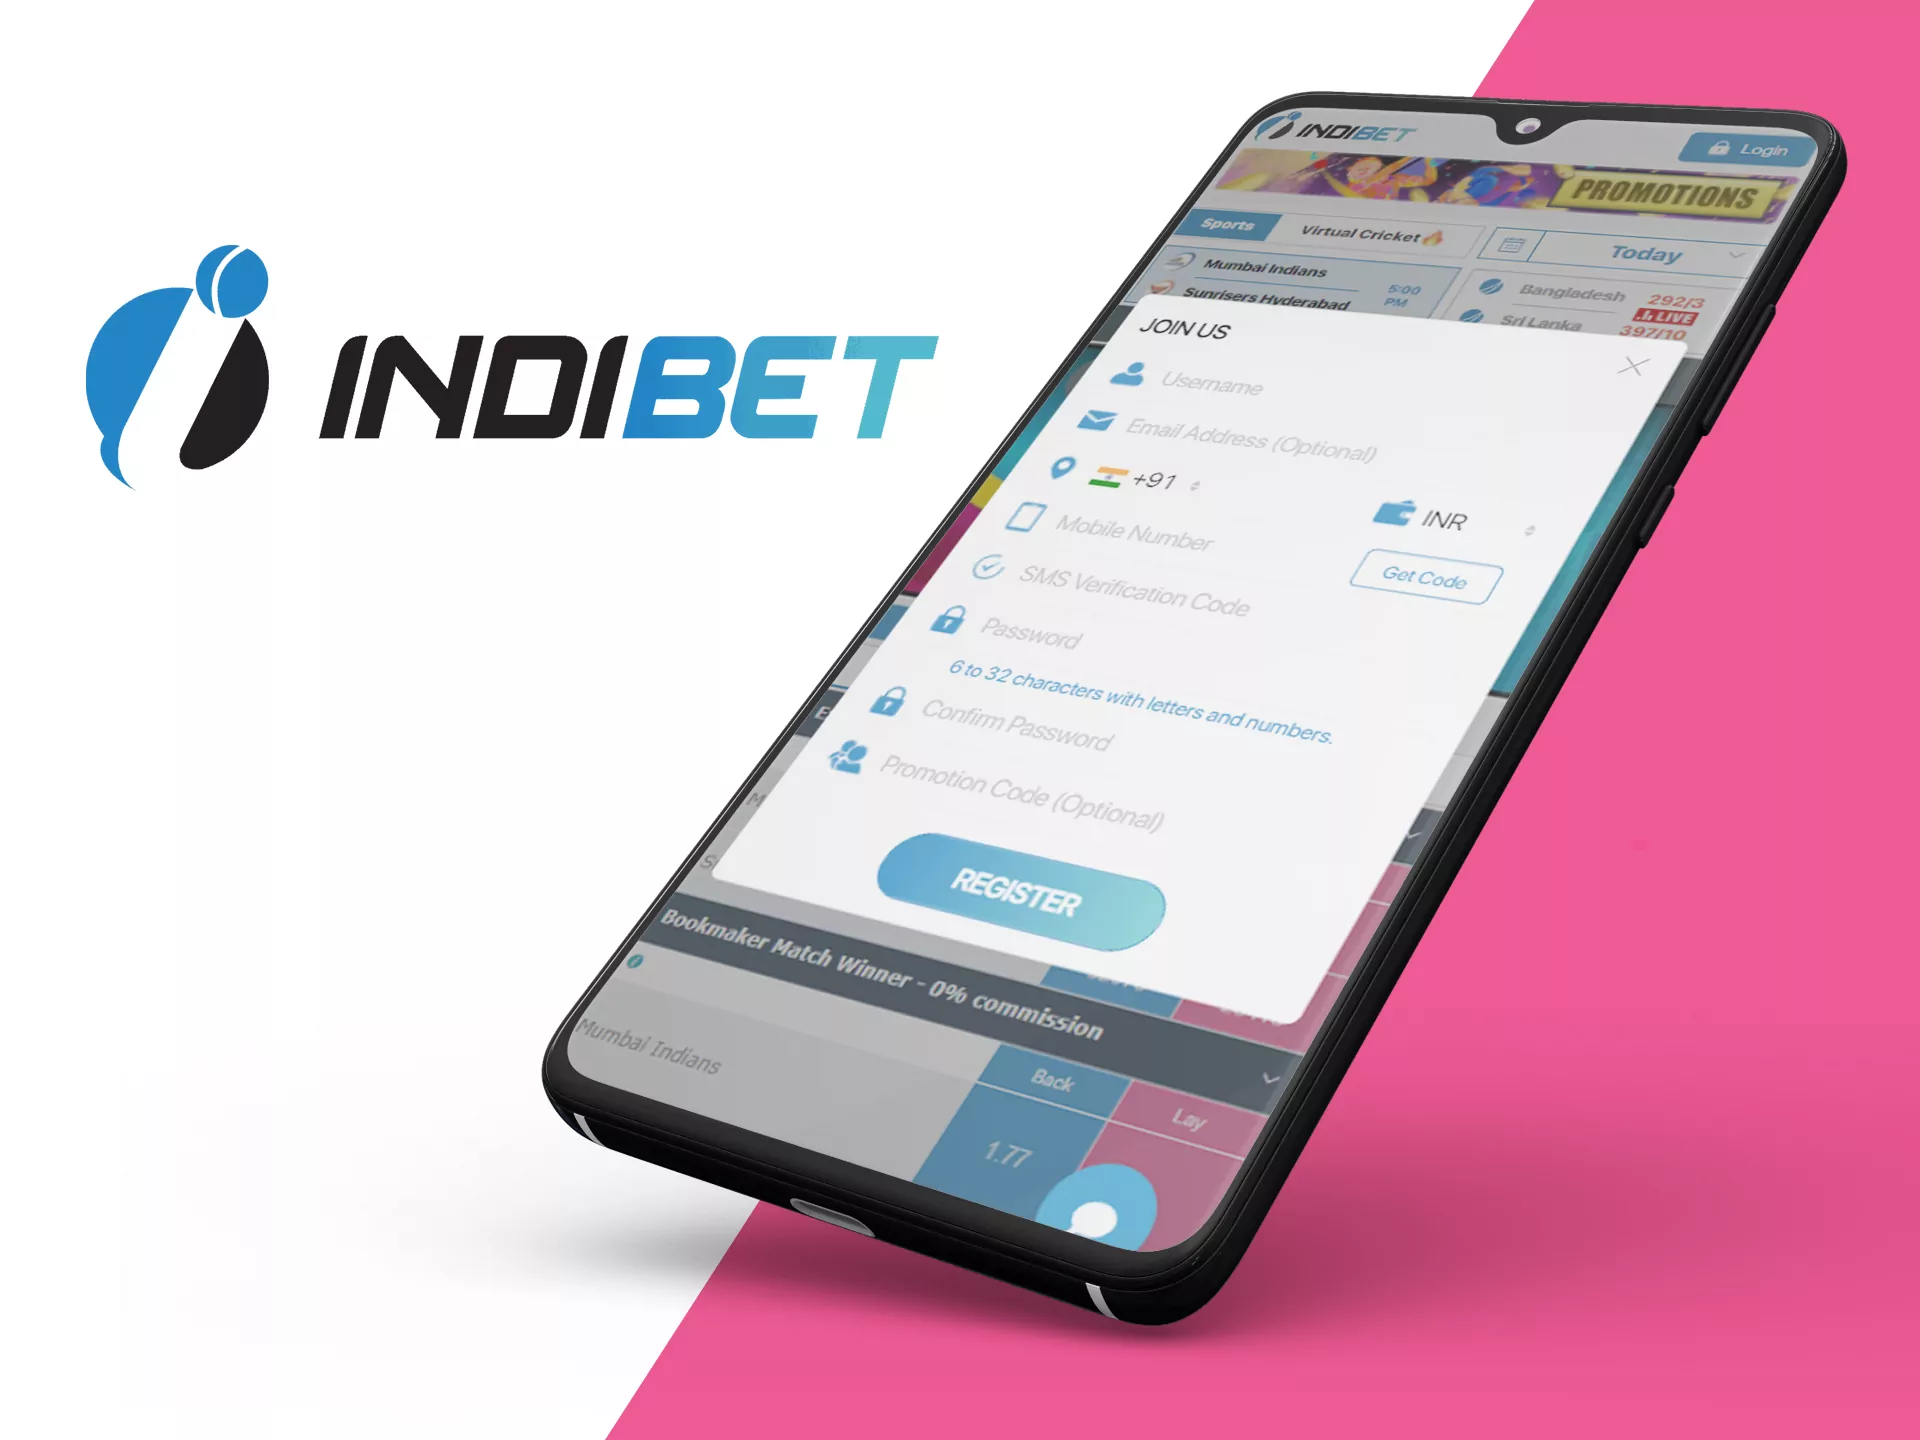 Open the Indibet app and create an account.